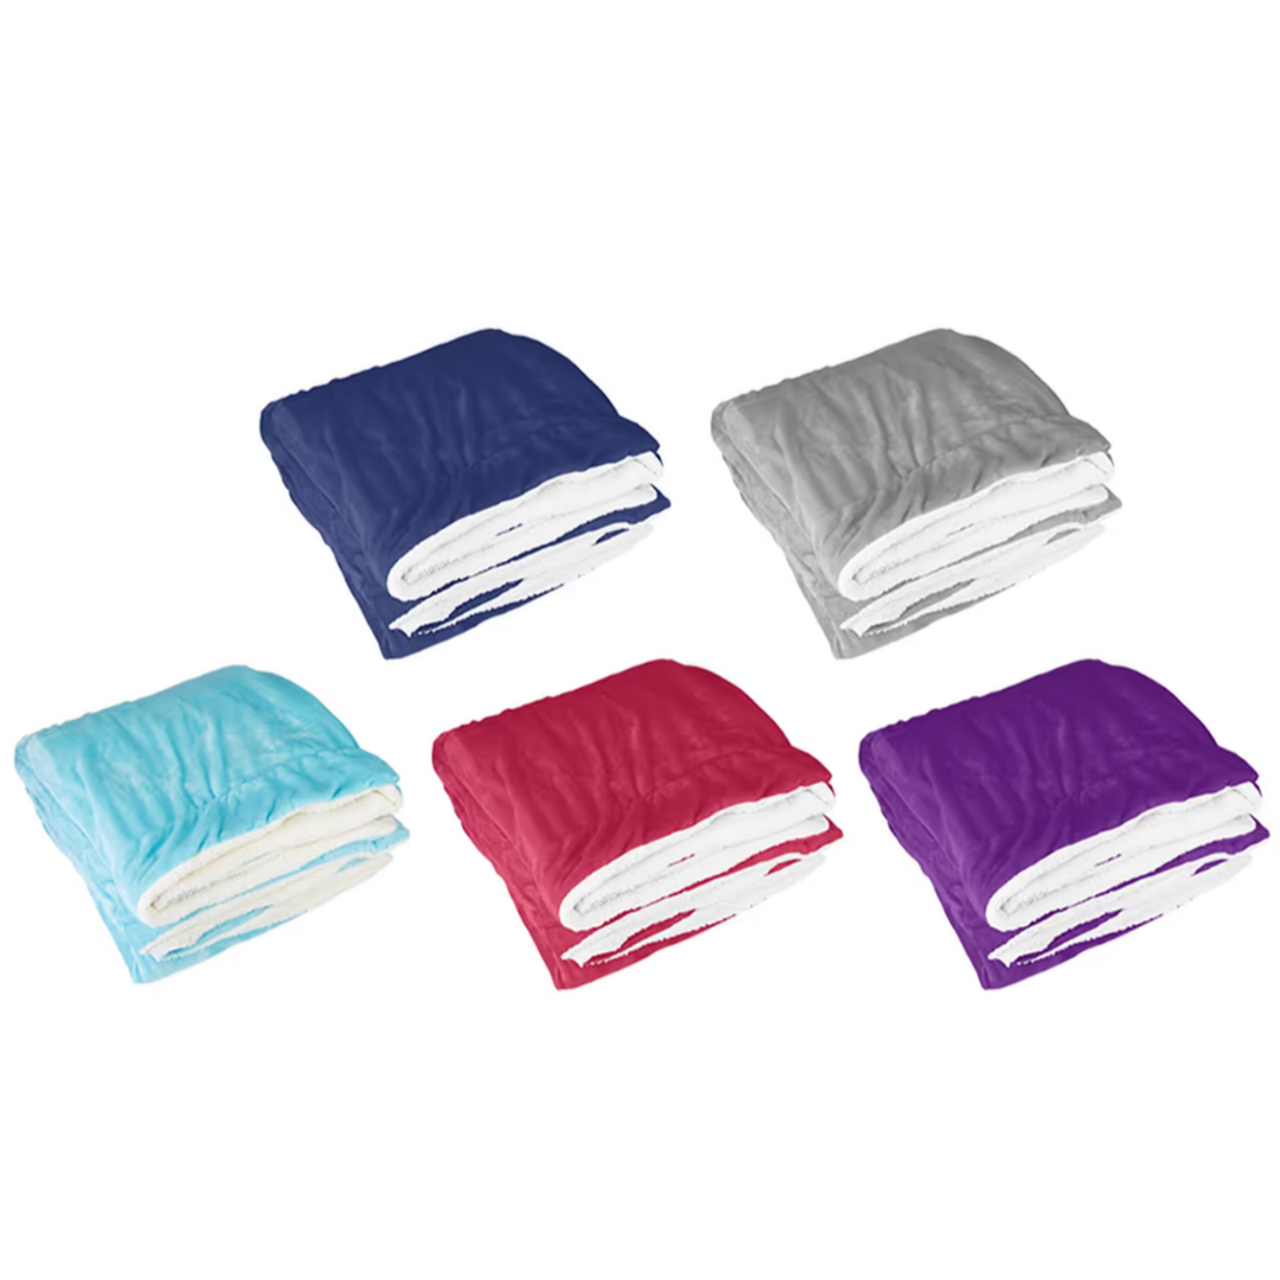 NewHome™ Soft Fleece Throw Blankets product image